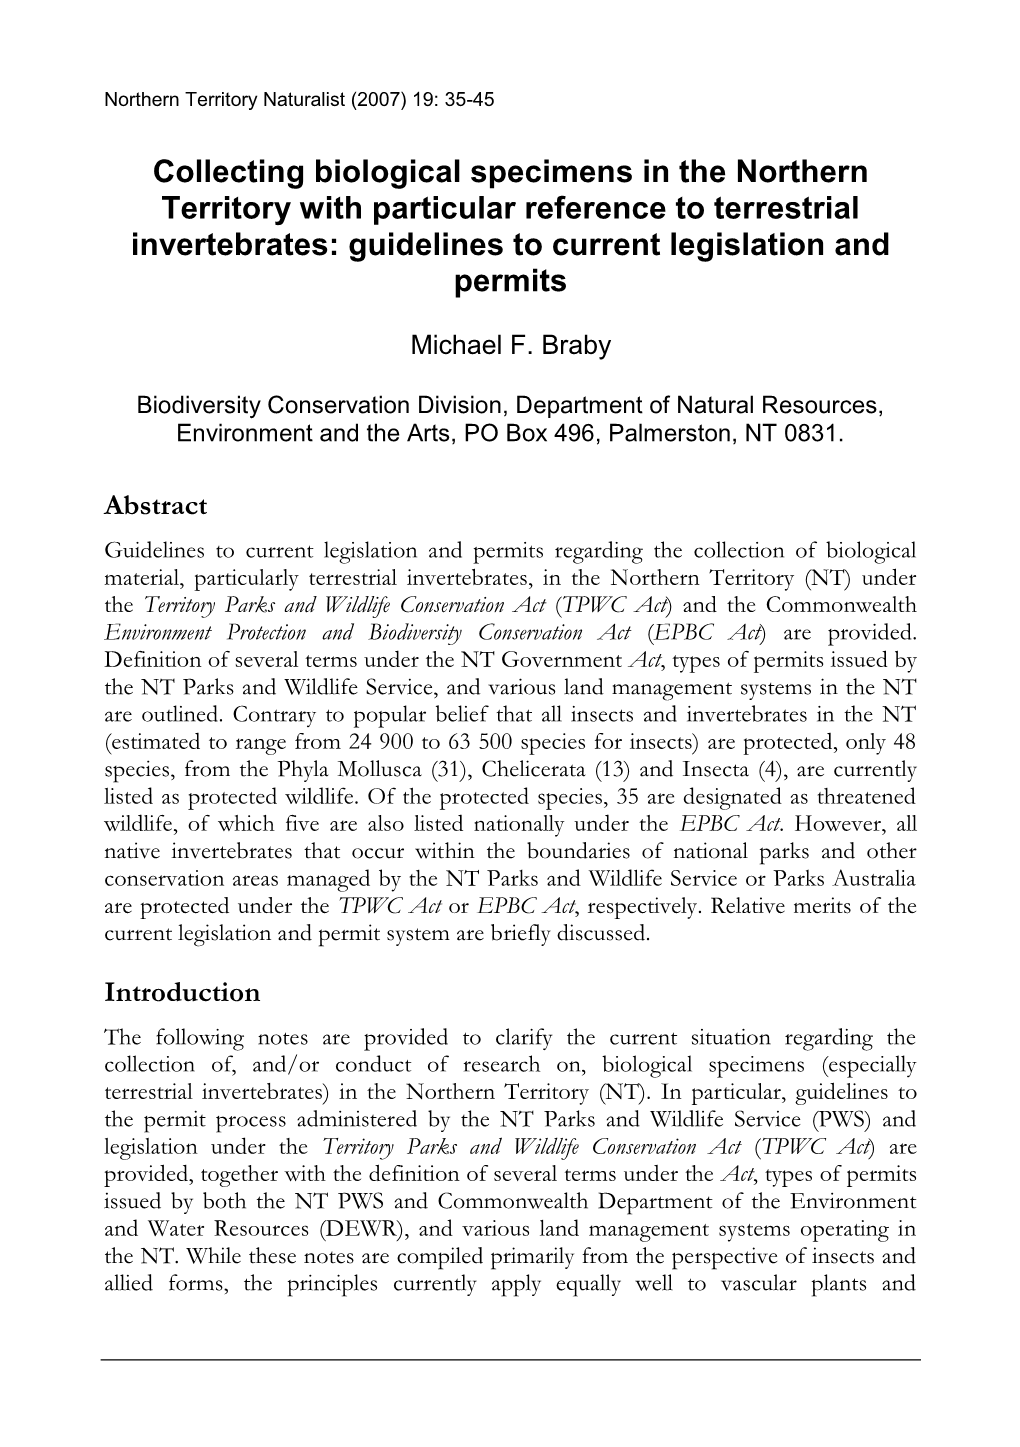 Collecting Biological Specimens in the Northern Territory with Particular Reference to Terrestrial Invertebrates: Guidelines to Current Legislation and Permits